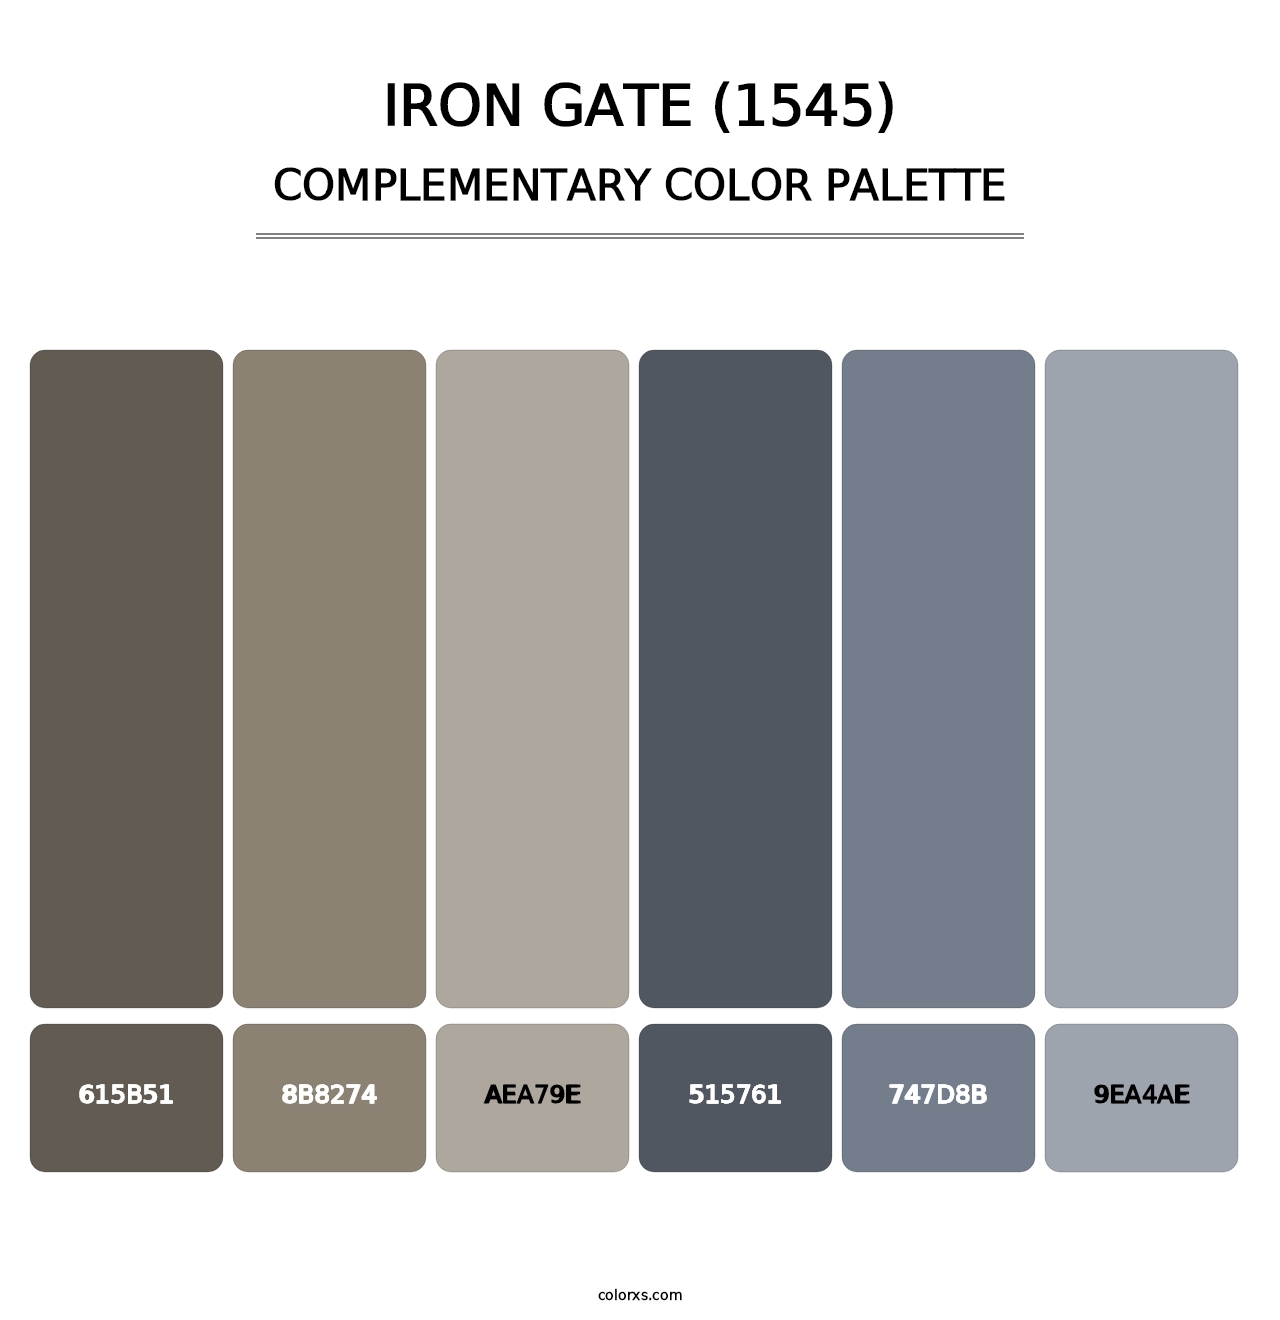 Iron Gate (1545) - Complementary Color Palette